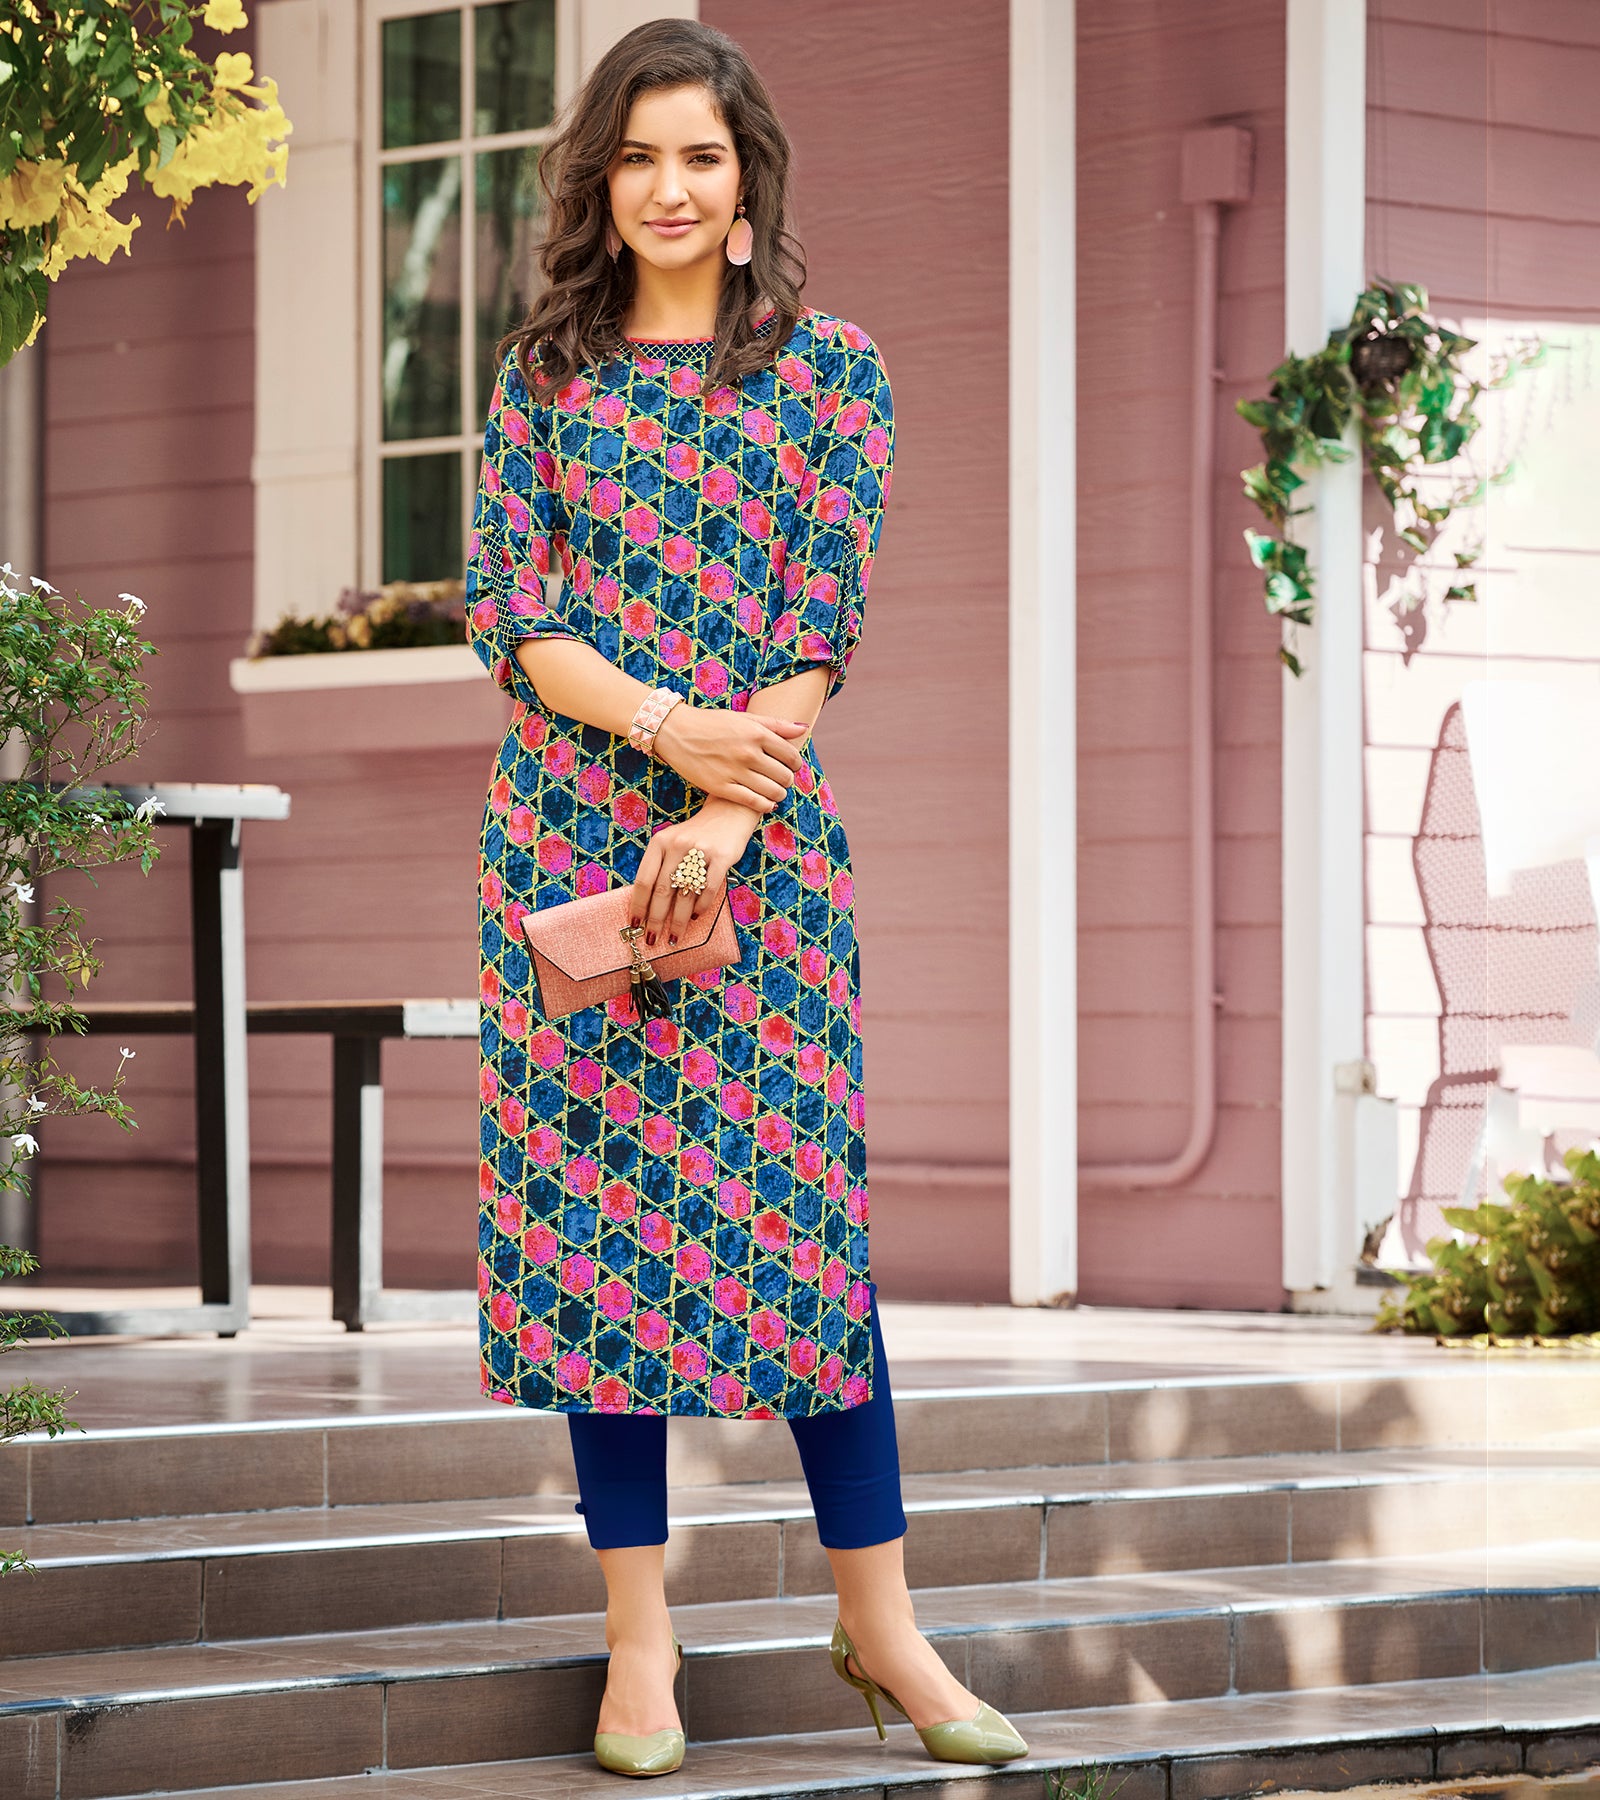 Buy American Crepe Kurtis, American Crepe Short Kurtis, Full Sleeves  American Crepe Kurtis in India at affordable prices. | Femme style, Femme,  Style indien